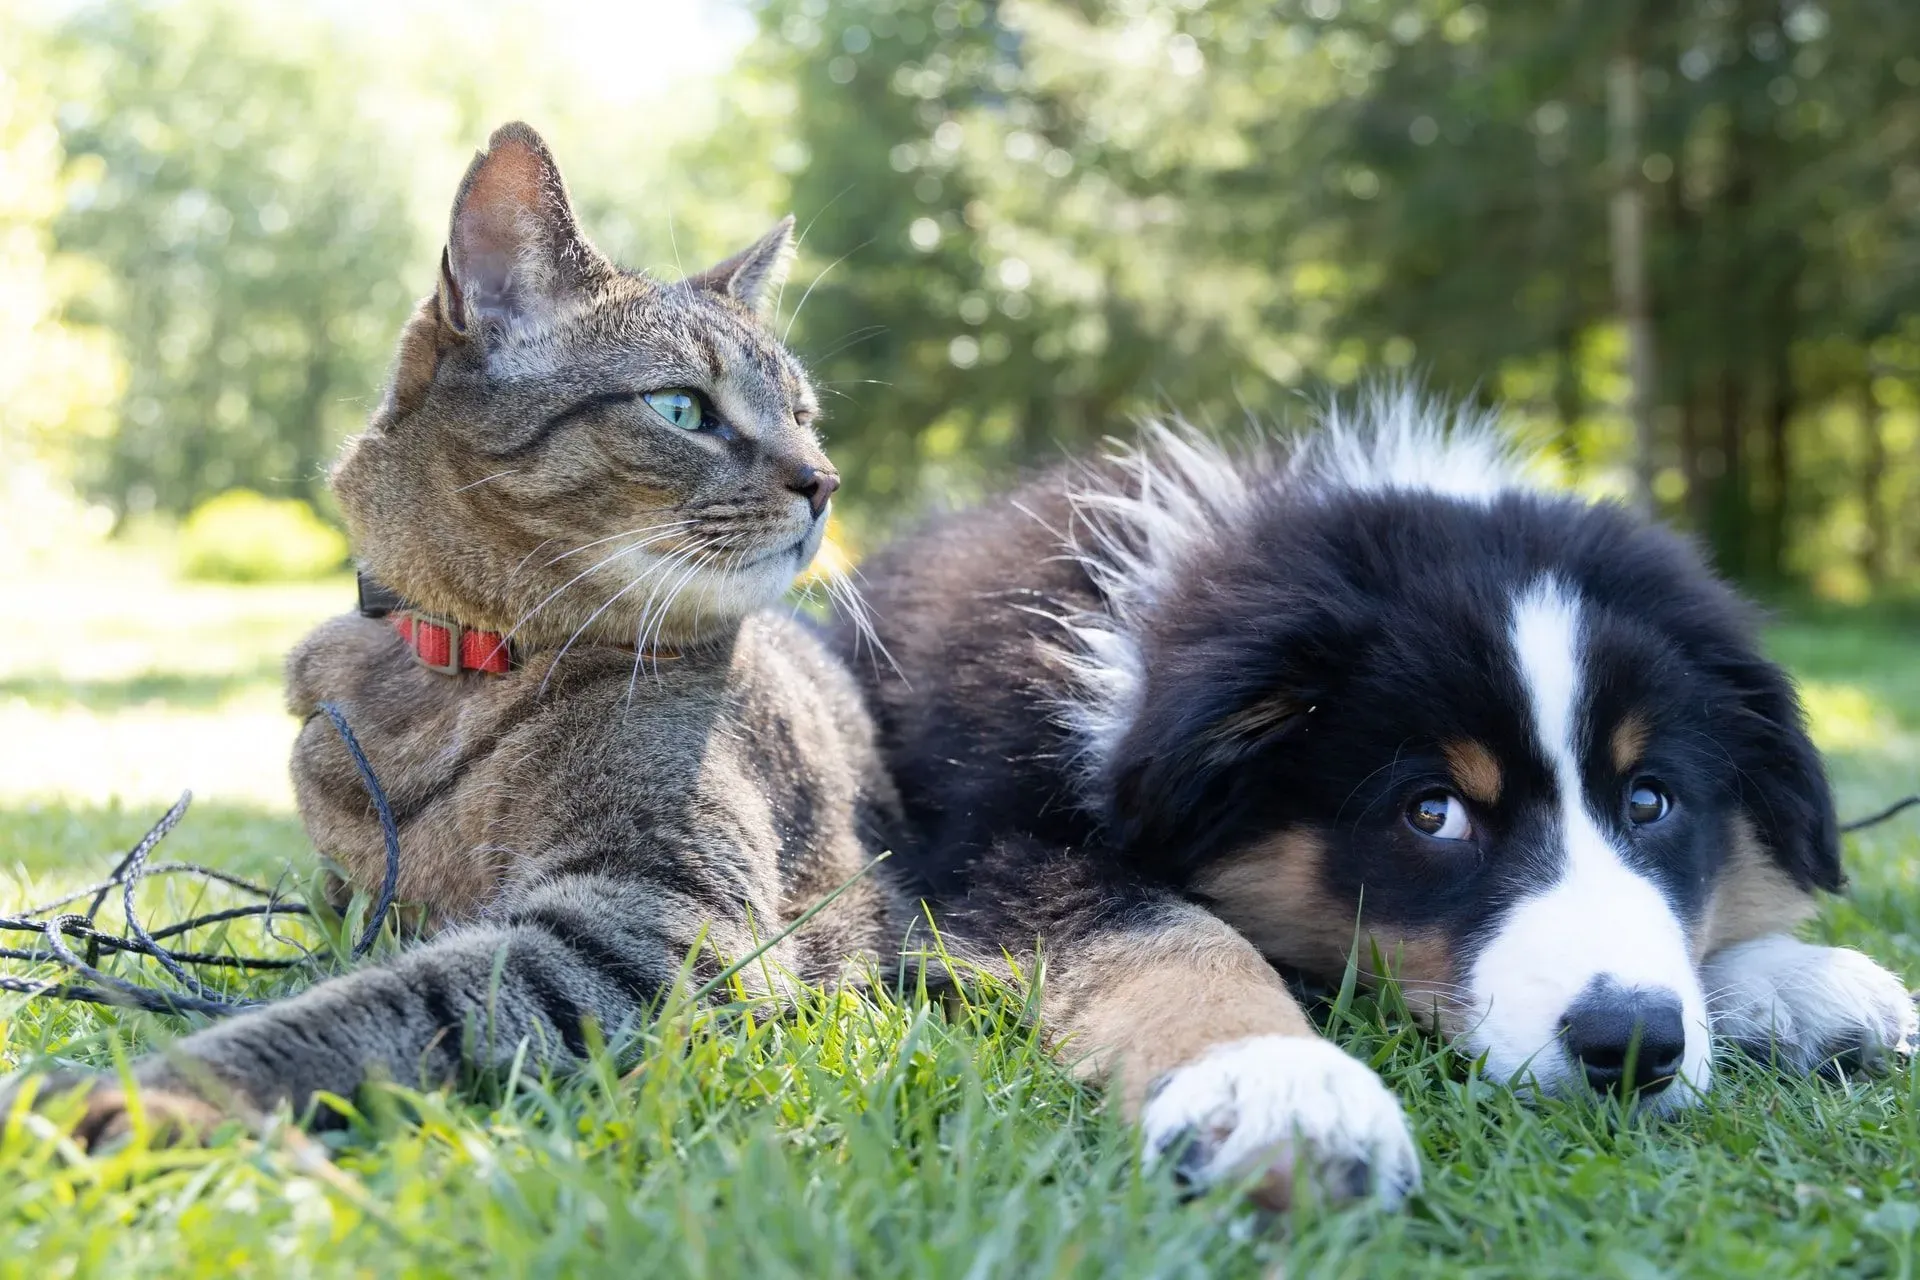 It is a cat and a dog reflecting upon their bittersweet relationship.